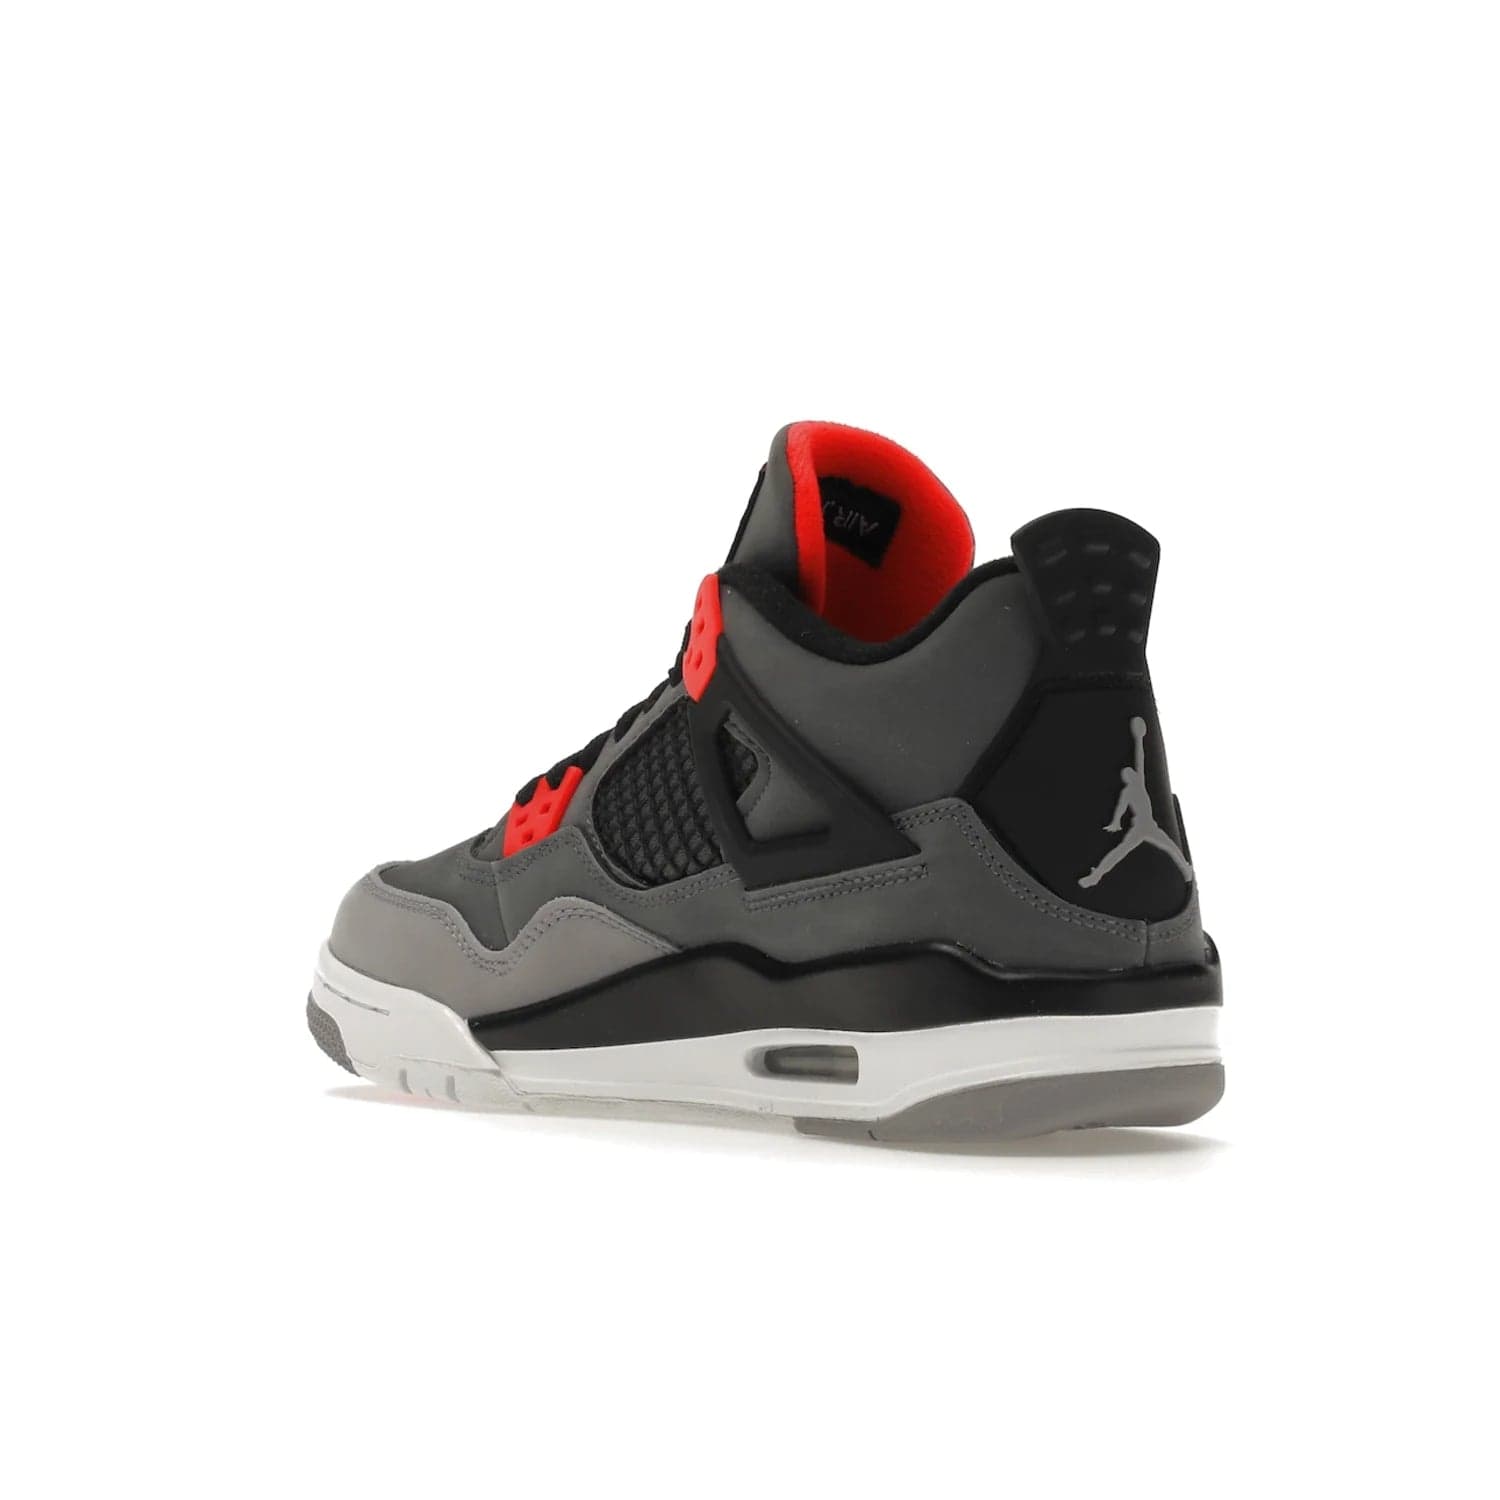 Jordan 4 Retro Infrared (GS) - Image 24 - Only at www.BallersClubKickz.com - Shop the Air Jordan 4 Retro Infrared (GS) for a classic silhouette with subtle yet bold features. Dark grey nubuck upper with lighter forefoot overlay, black accents, Infrared molded eyelets & woven tongue tag. Available June 2022.